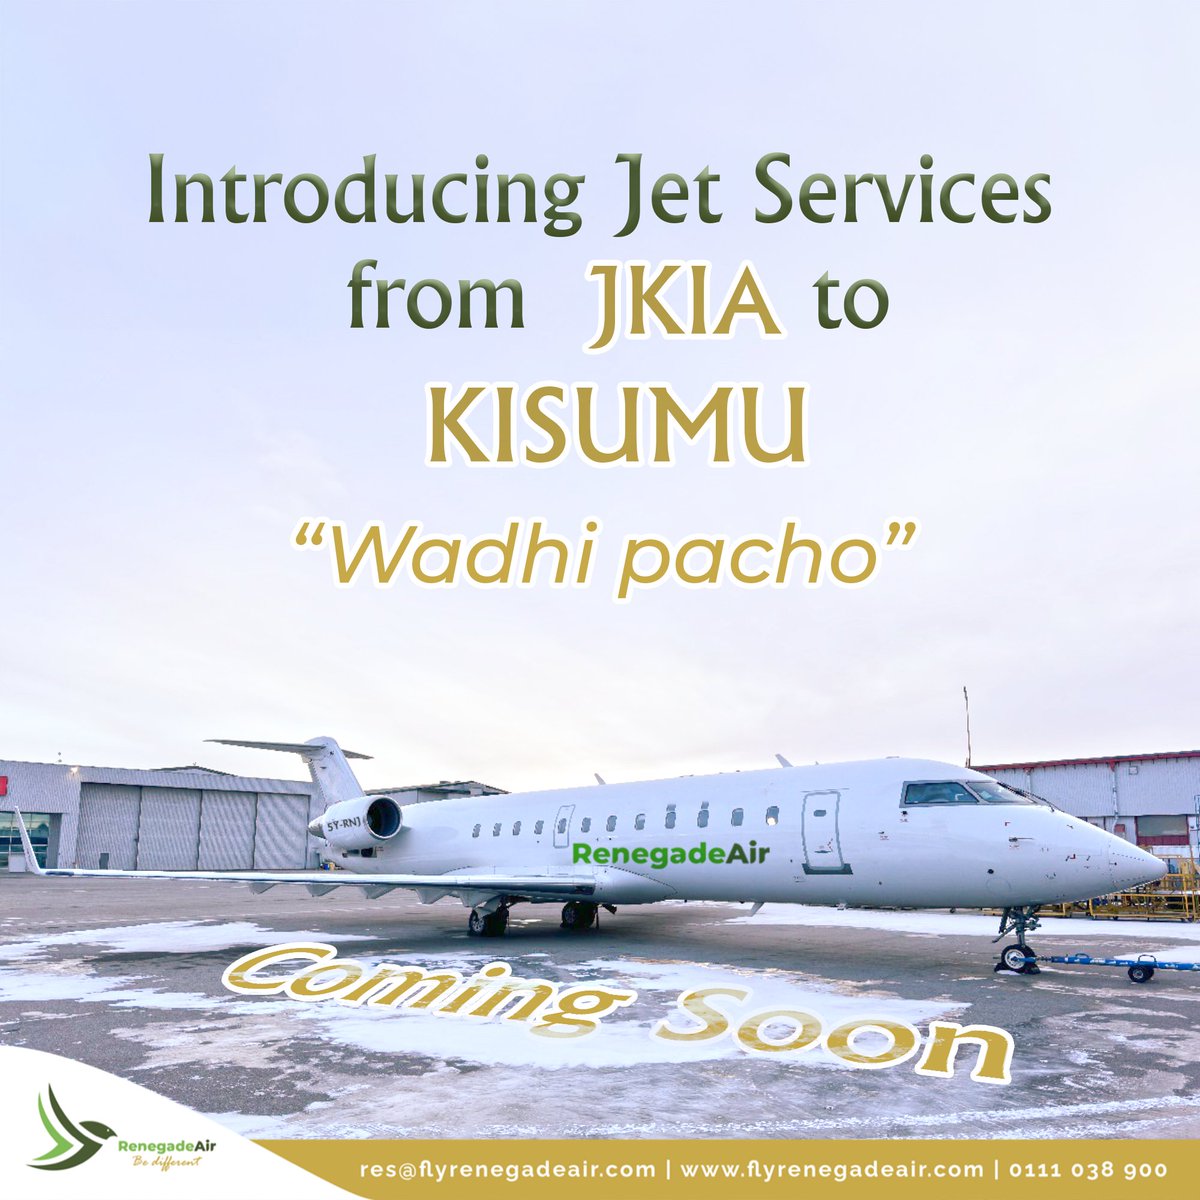 Exciting news! Direct jet services from JKIA to #Kisumu coming soon! This special offering is our way of saying thank you to our loyal Kisumu customers flying with us from Wilson Airport. Get ready for a seamless journey. Stay tuned! #flyrenegaeair #flyrenegadeairexperience